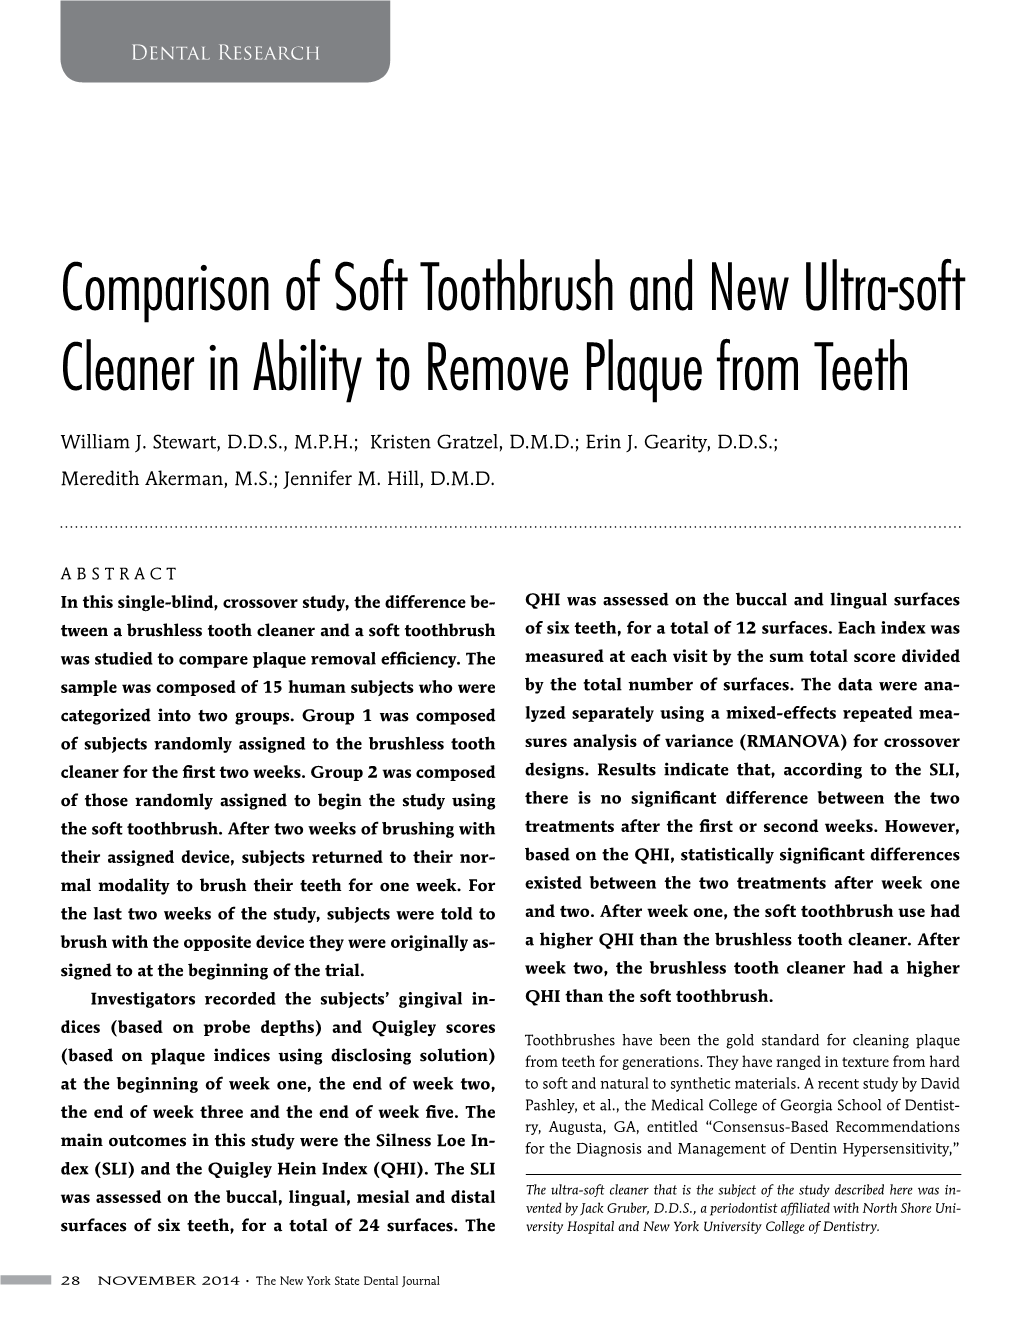 Comparison of Soft Toothbrush and New Ultra-Soft Cleaner in Ability to Remove Plaque from Teeth